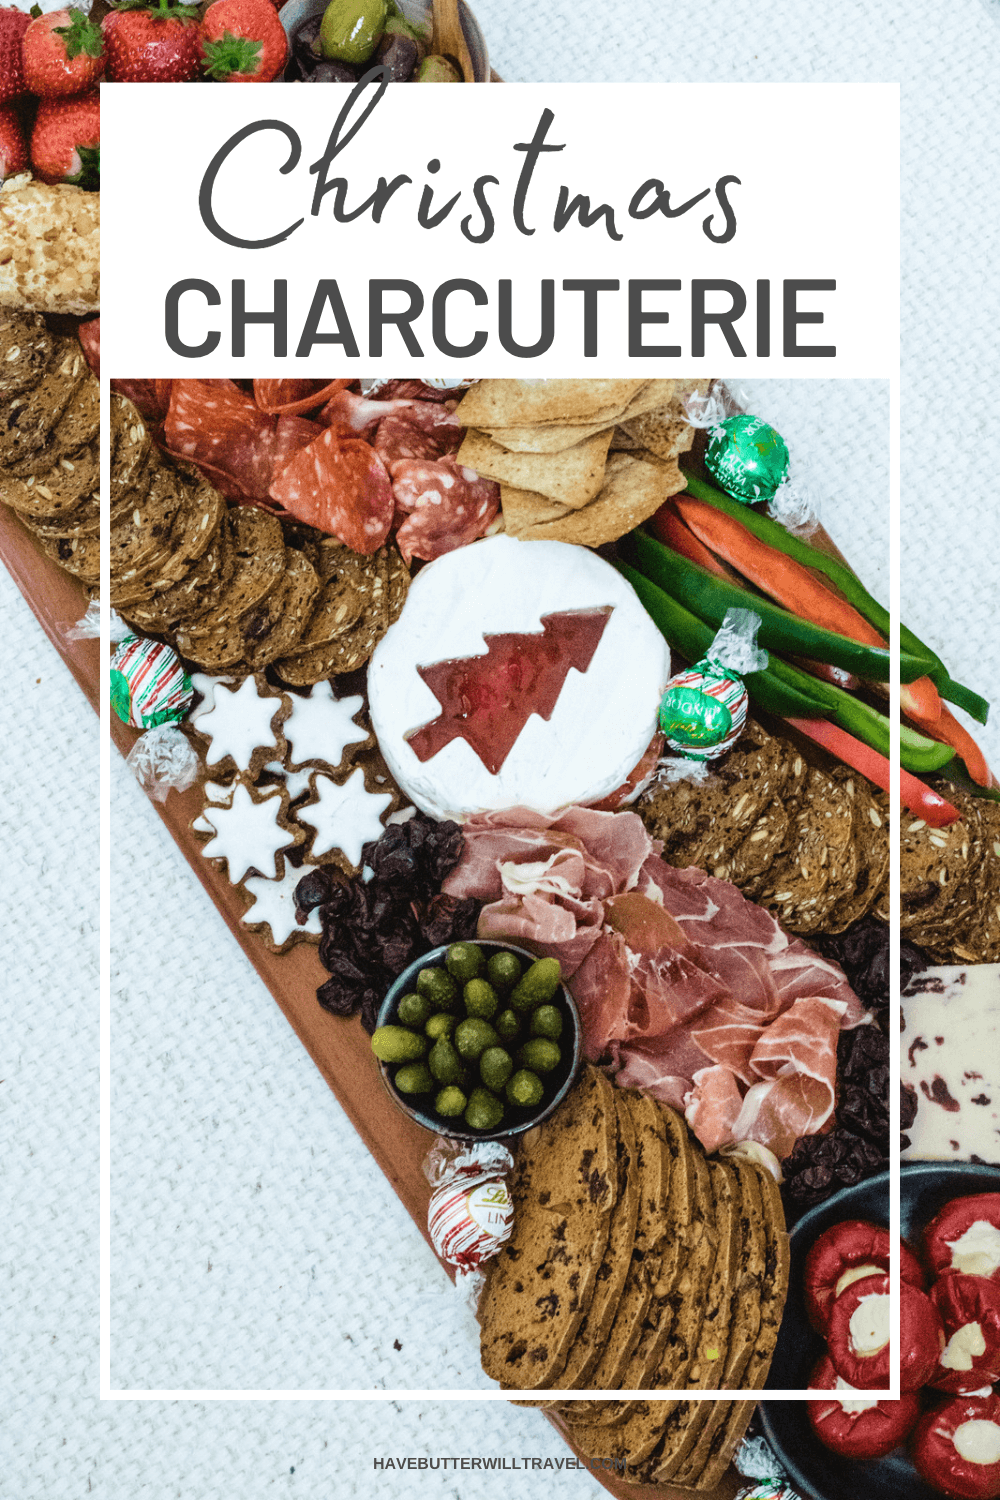 A Christmas charcuterie board is the perfect way to wow your family and friends when you are entertaining this holiday season!